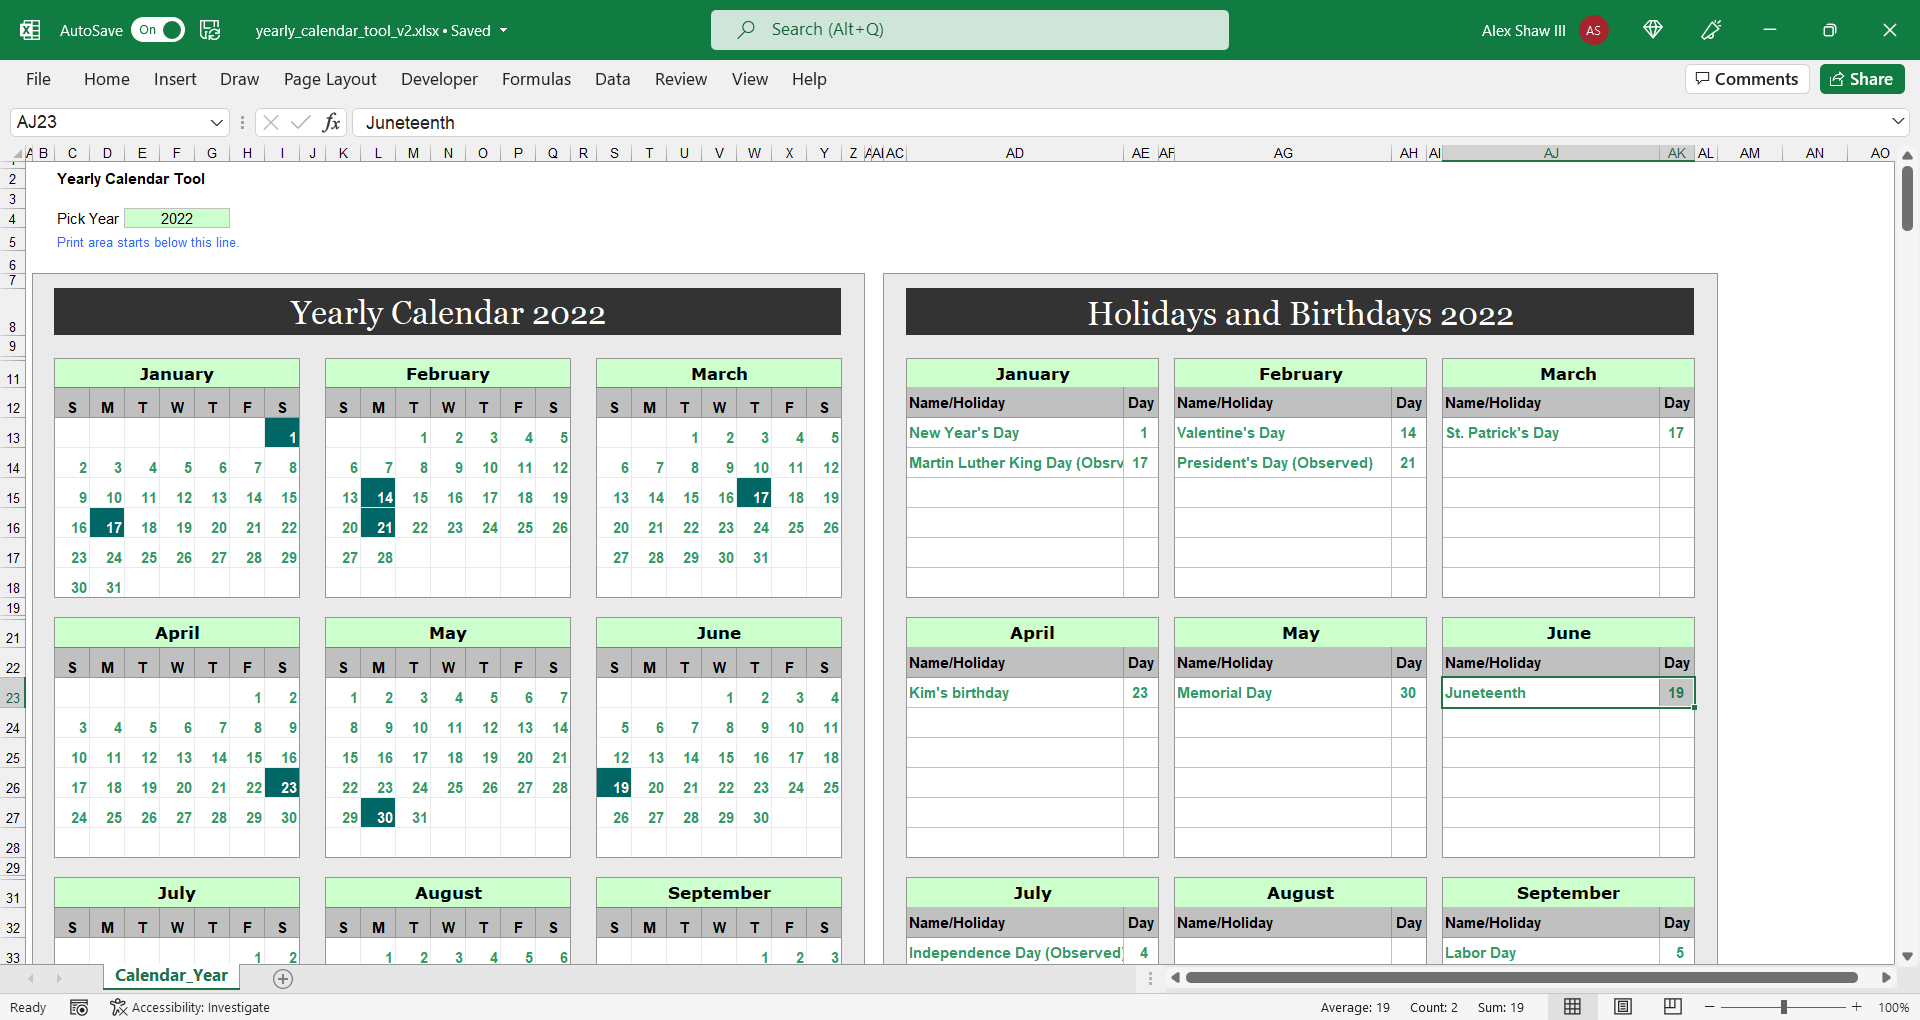 Add a holiday or special day to the Yearly Calendar - How to